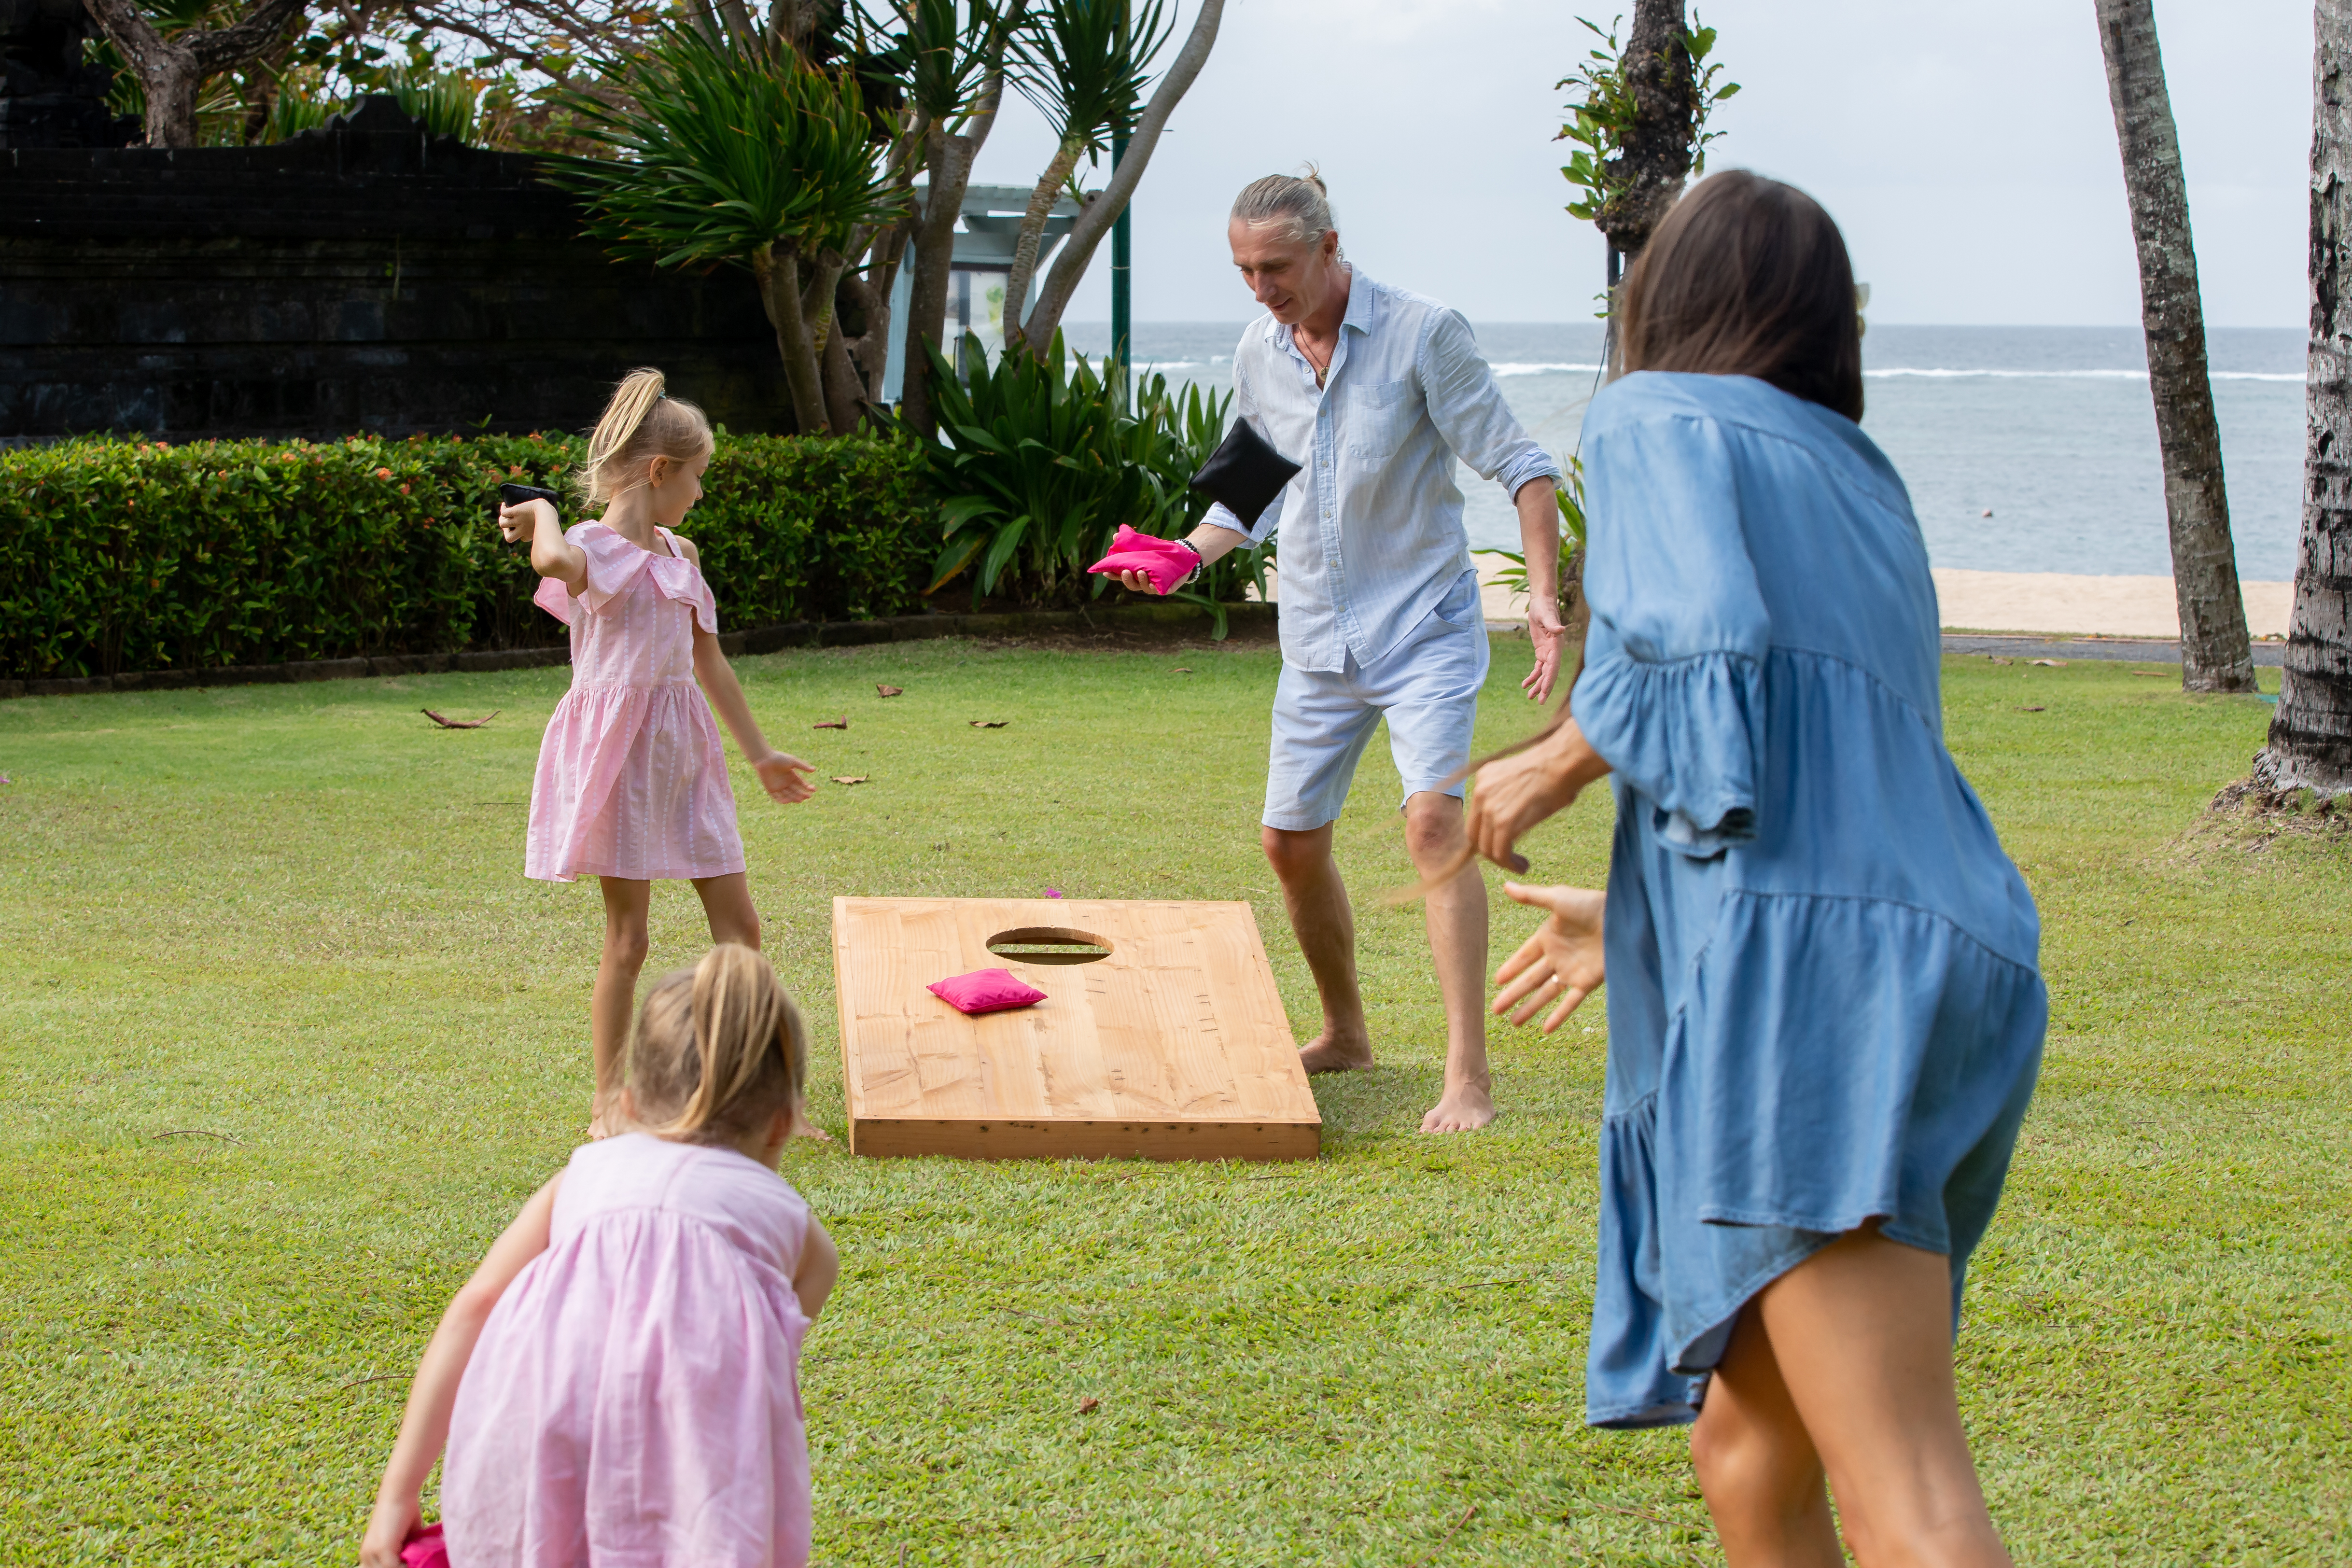 The best yard games you can play all summer long